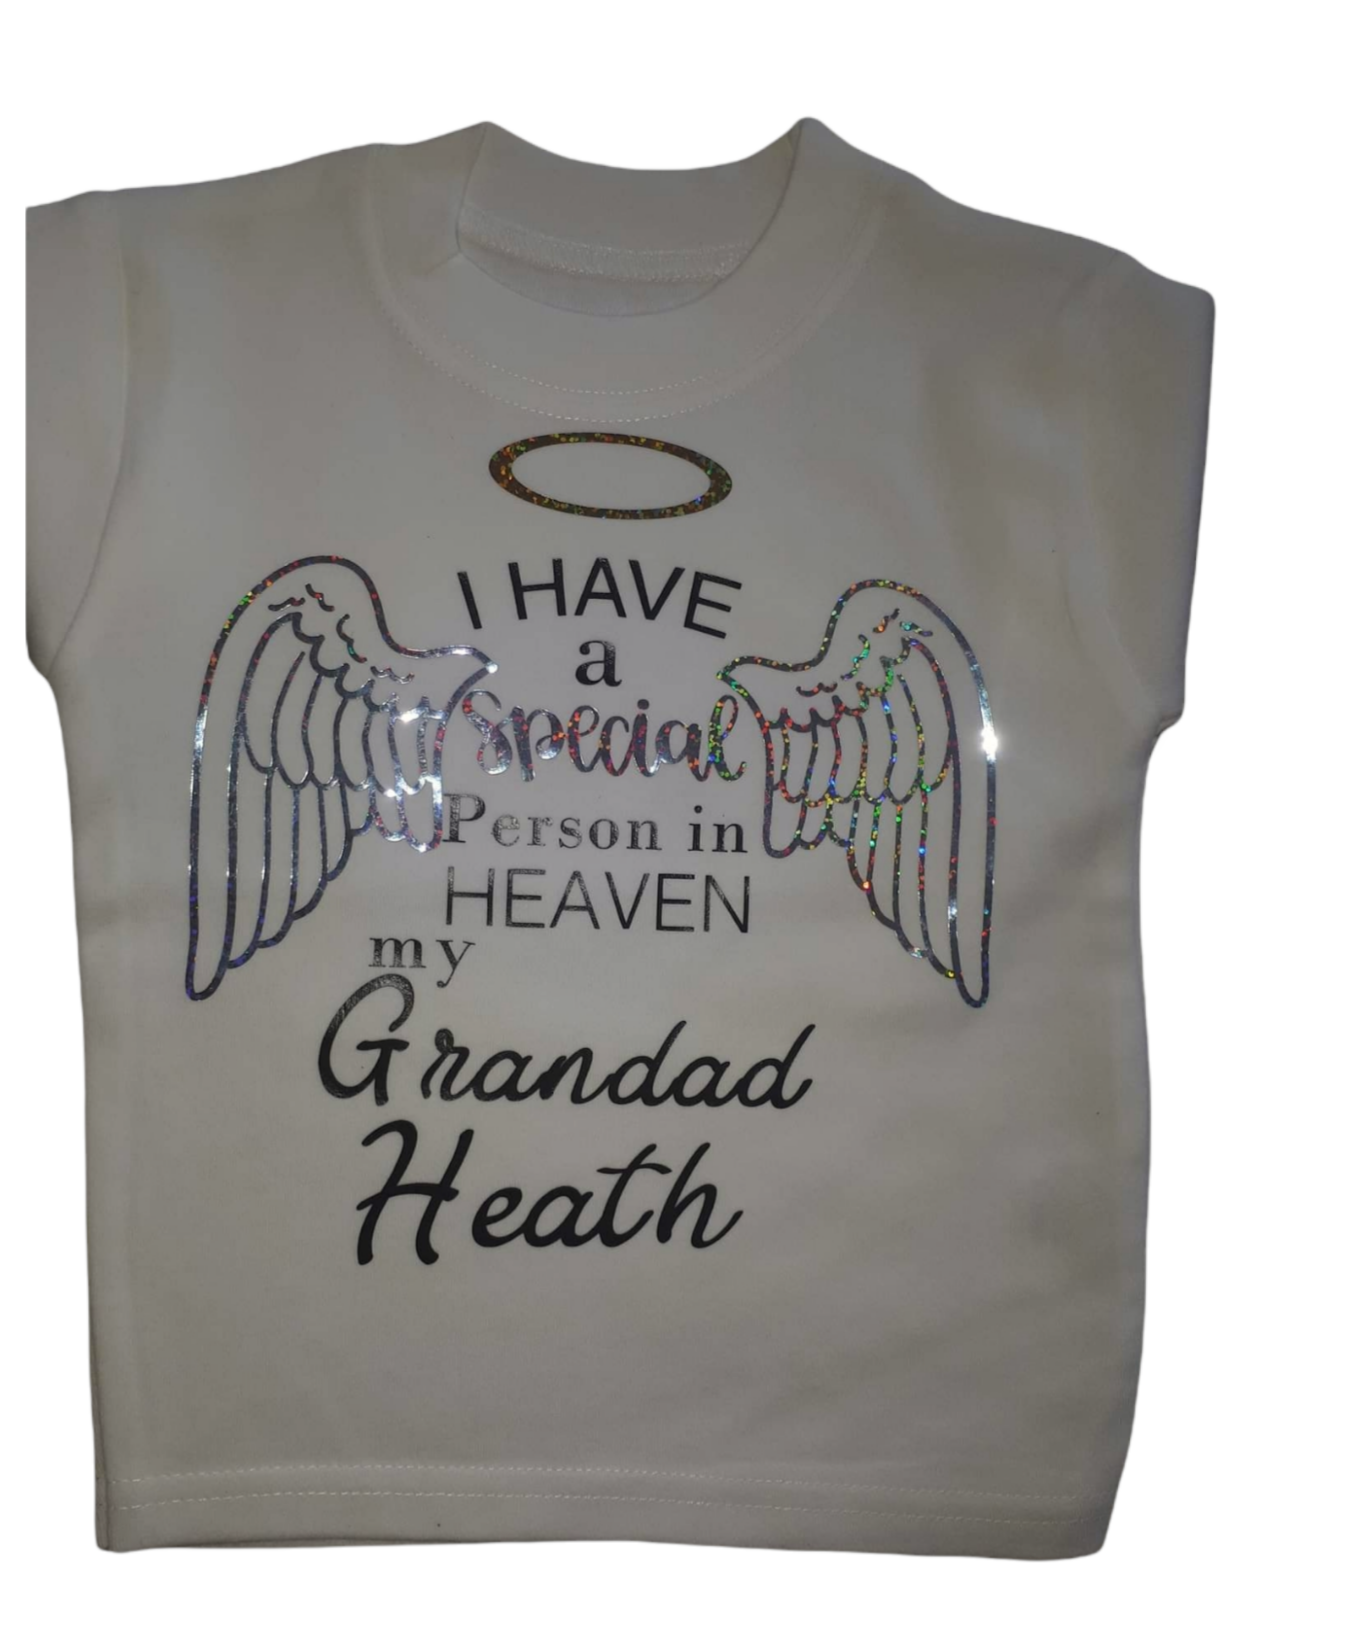 Heaven baby andvtoddlers t shirts